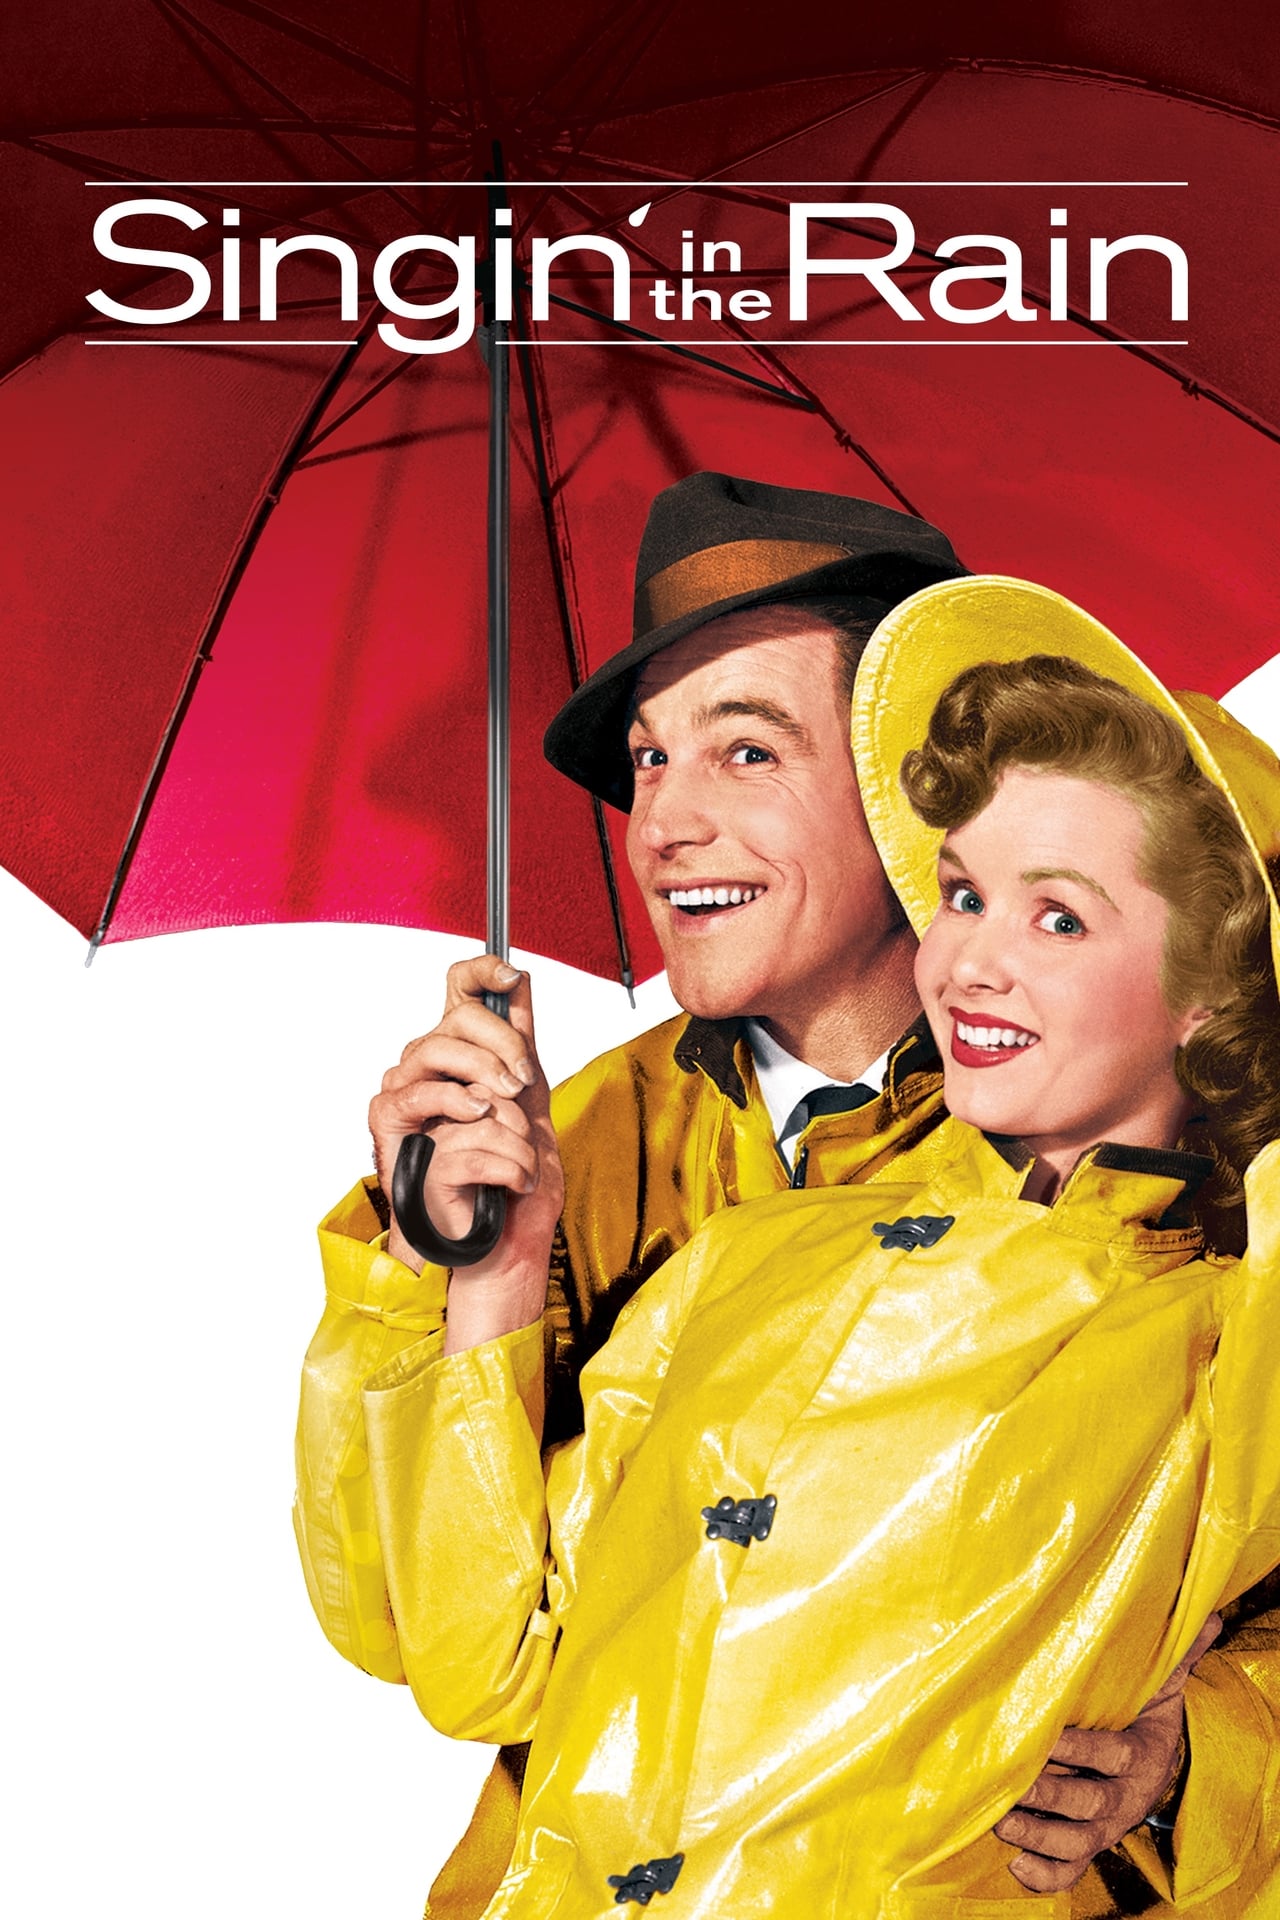 Singin' In the Rain wiki, synopsis, reviews, watch and download